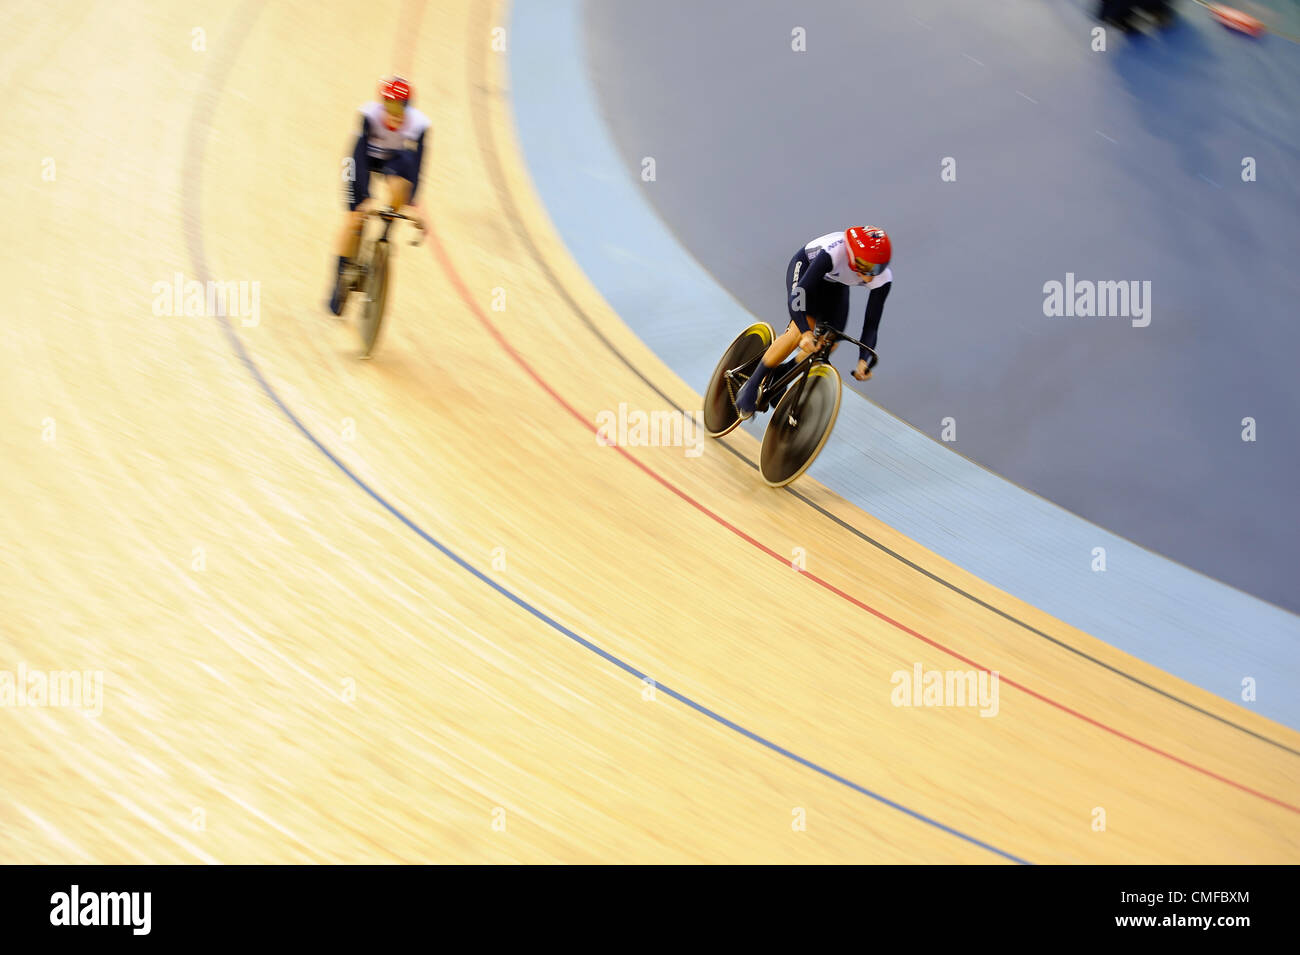 UK. 02.08.2012 Stratford, England. Great Britains Victoria Pendleton (GBR) and Jessica Varnish (GBR) compete in the Womens Team Sprint Qualifying during the track cycling Competition on day 6 of the London 2012 Olympic Games at the Velodrome in the Olympic Park. Stock Photo